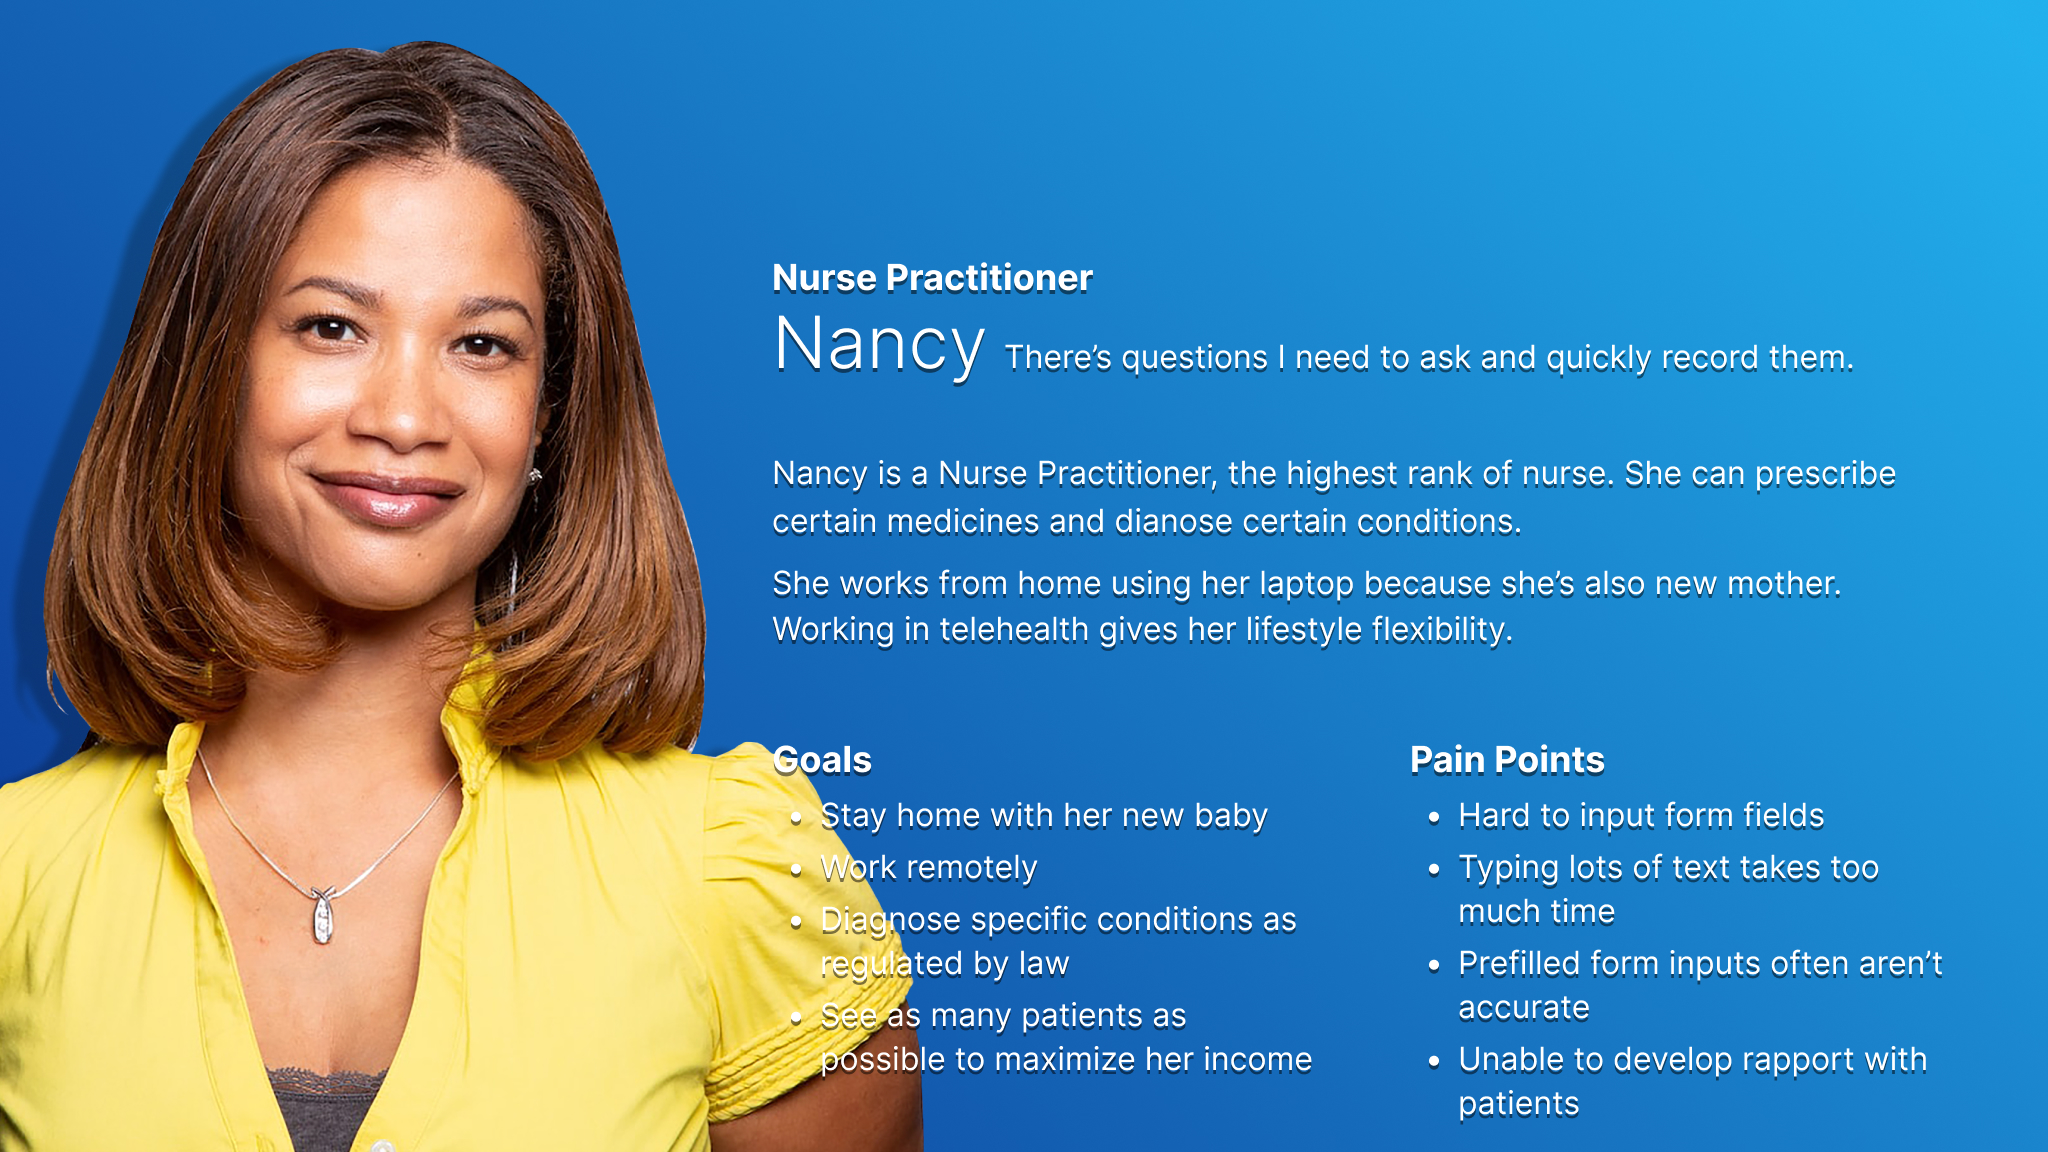 Persona card for Nancy who represents the nurse practitioners who use the web app process and diagnose patients.